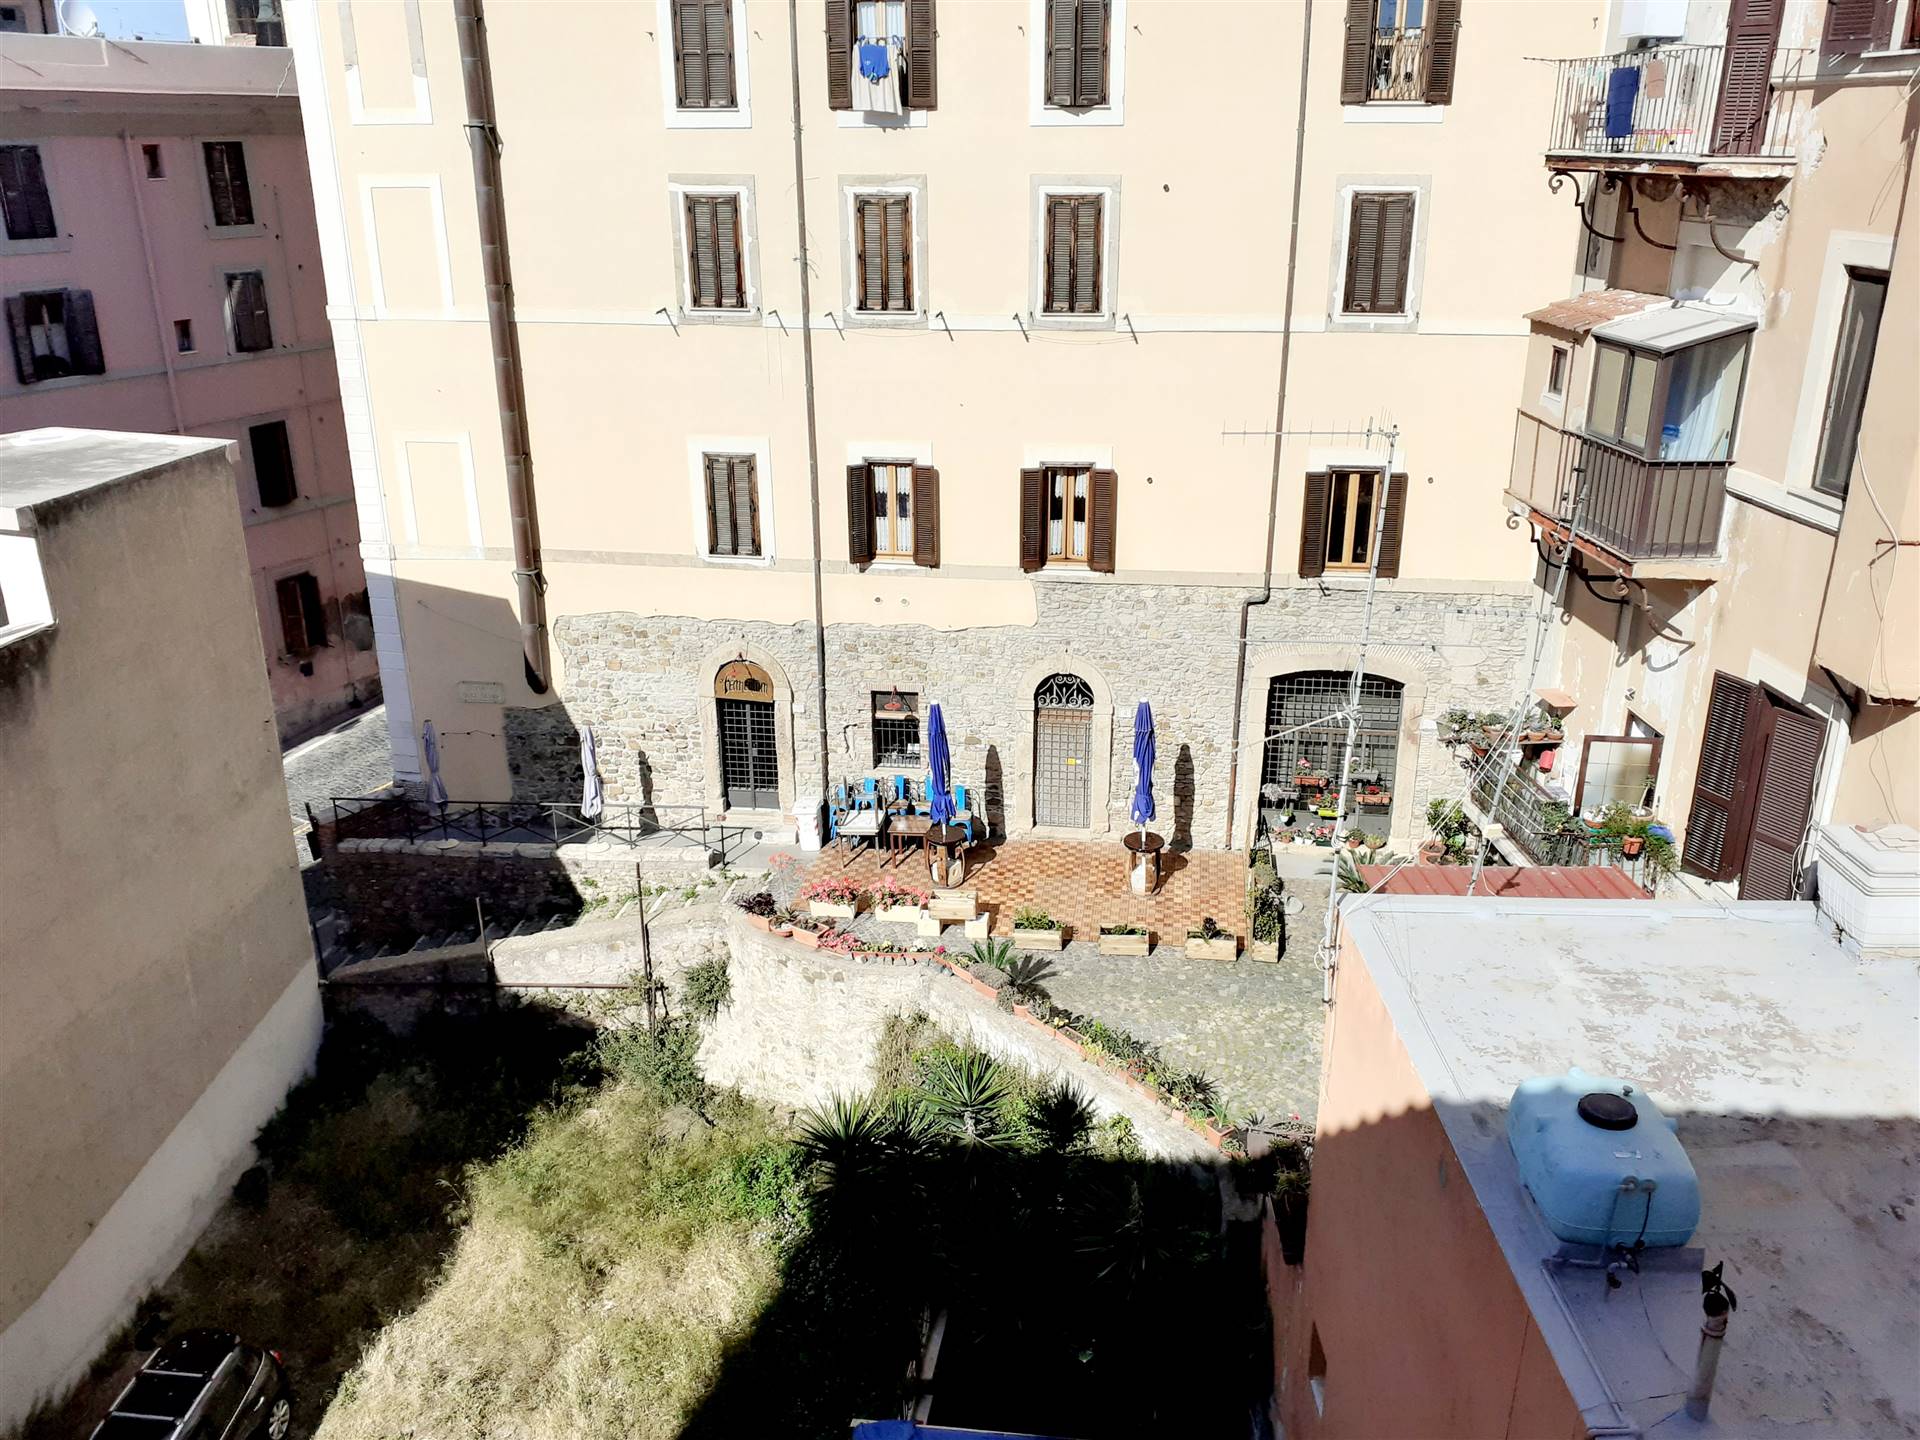 CIVITAVECCHIA, Apartment for sale of 71 Sq. mt., Restored, Heating Individual heating system, Energetic class: G, Epi: 175 kwh/m2 year, placed at 4°, 